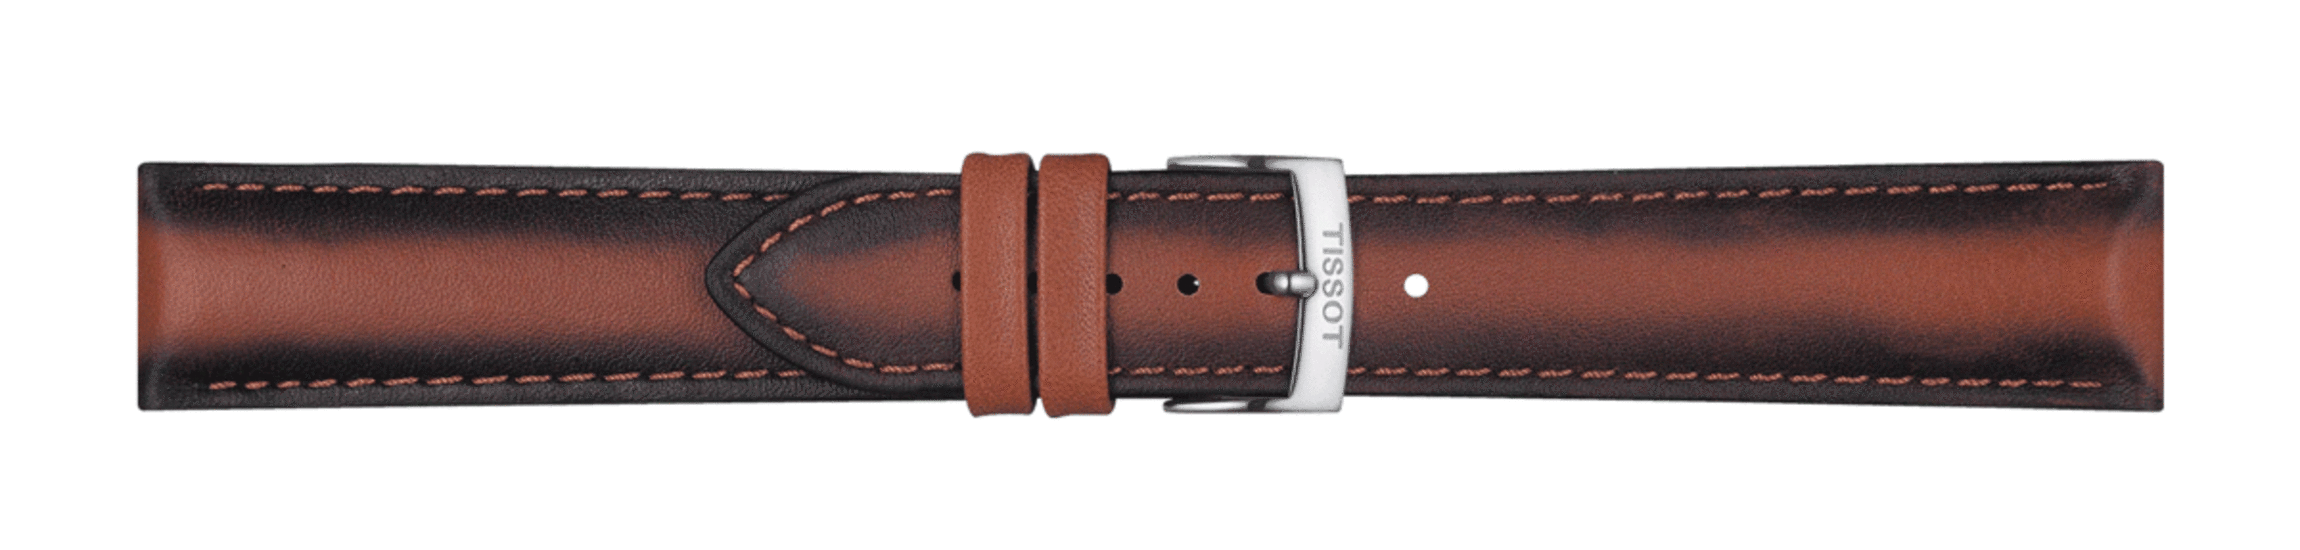 TISSOT T852.046.842 OFFICIAL BOWN LEATHER STRAP LUGS 20 MM